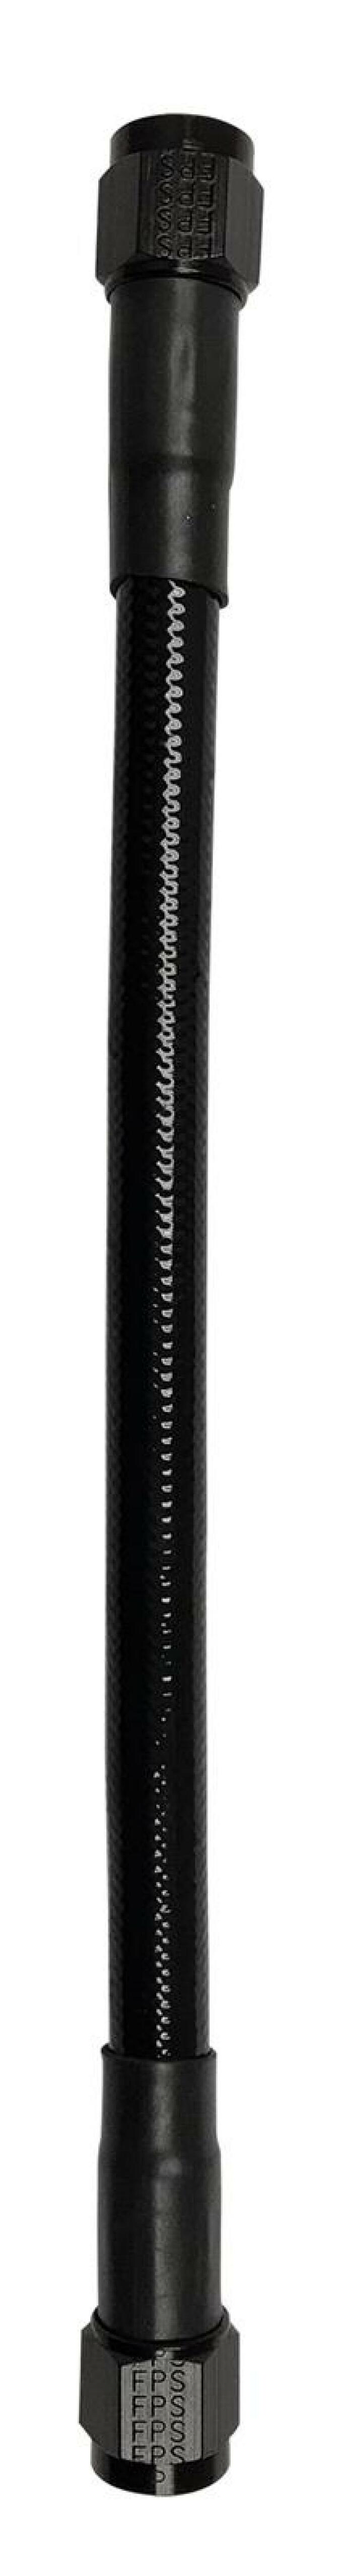 Fragola -10AN Ext Black PTFE Hose Assembly Straight x Straight 42in - 6029-1-1-42BL